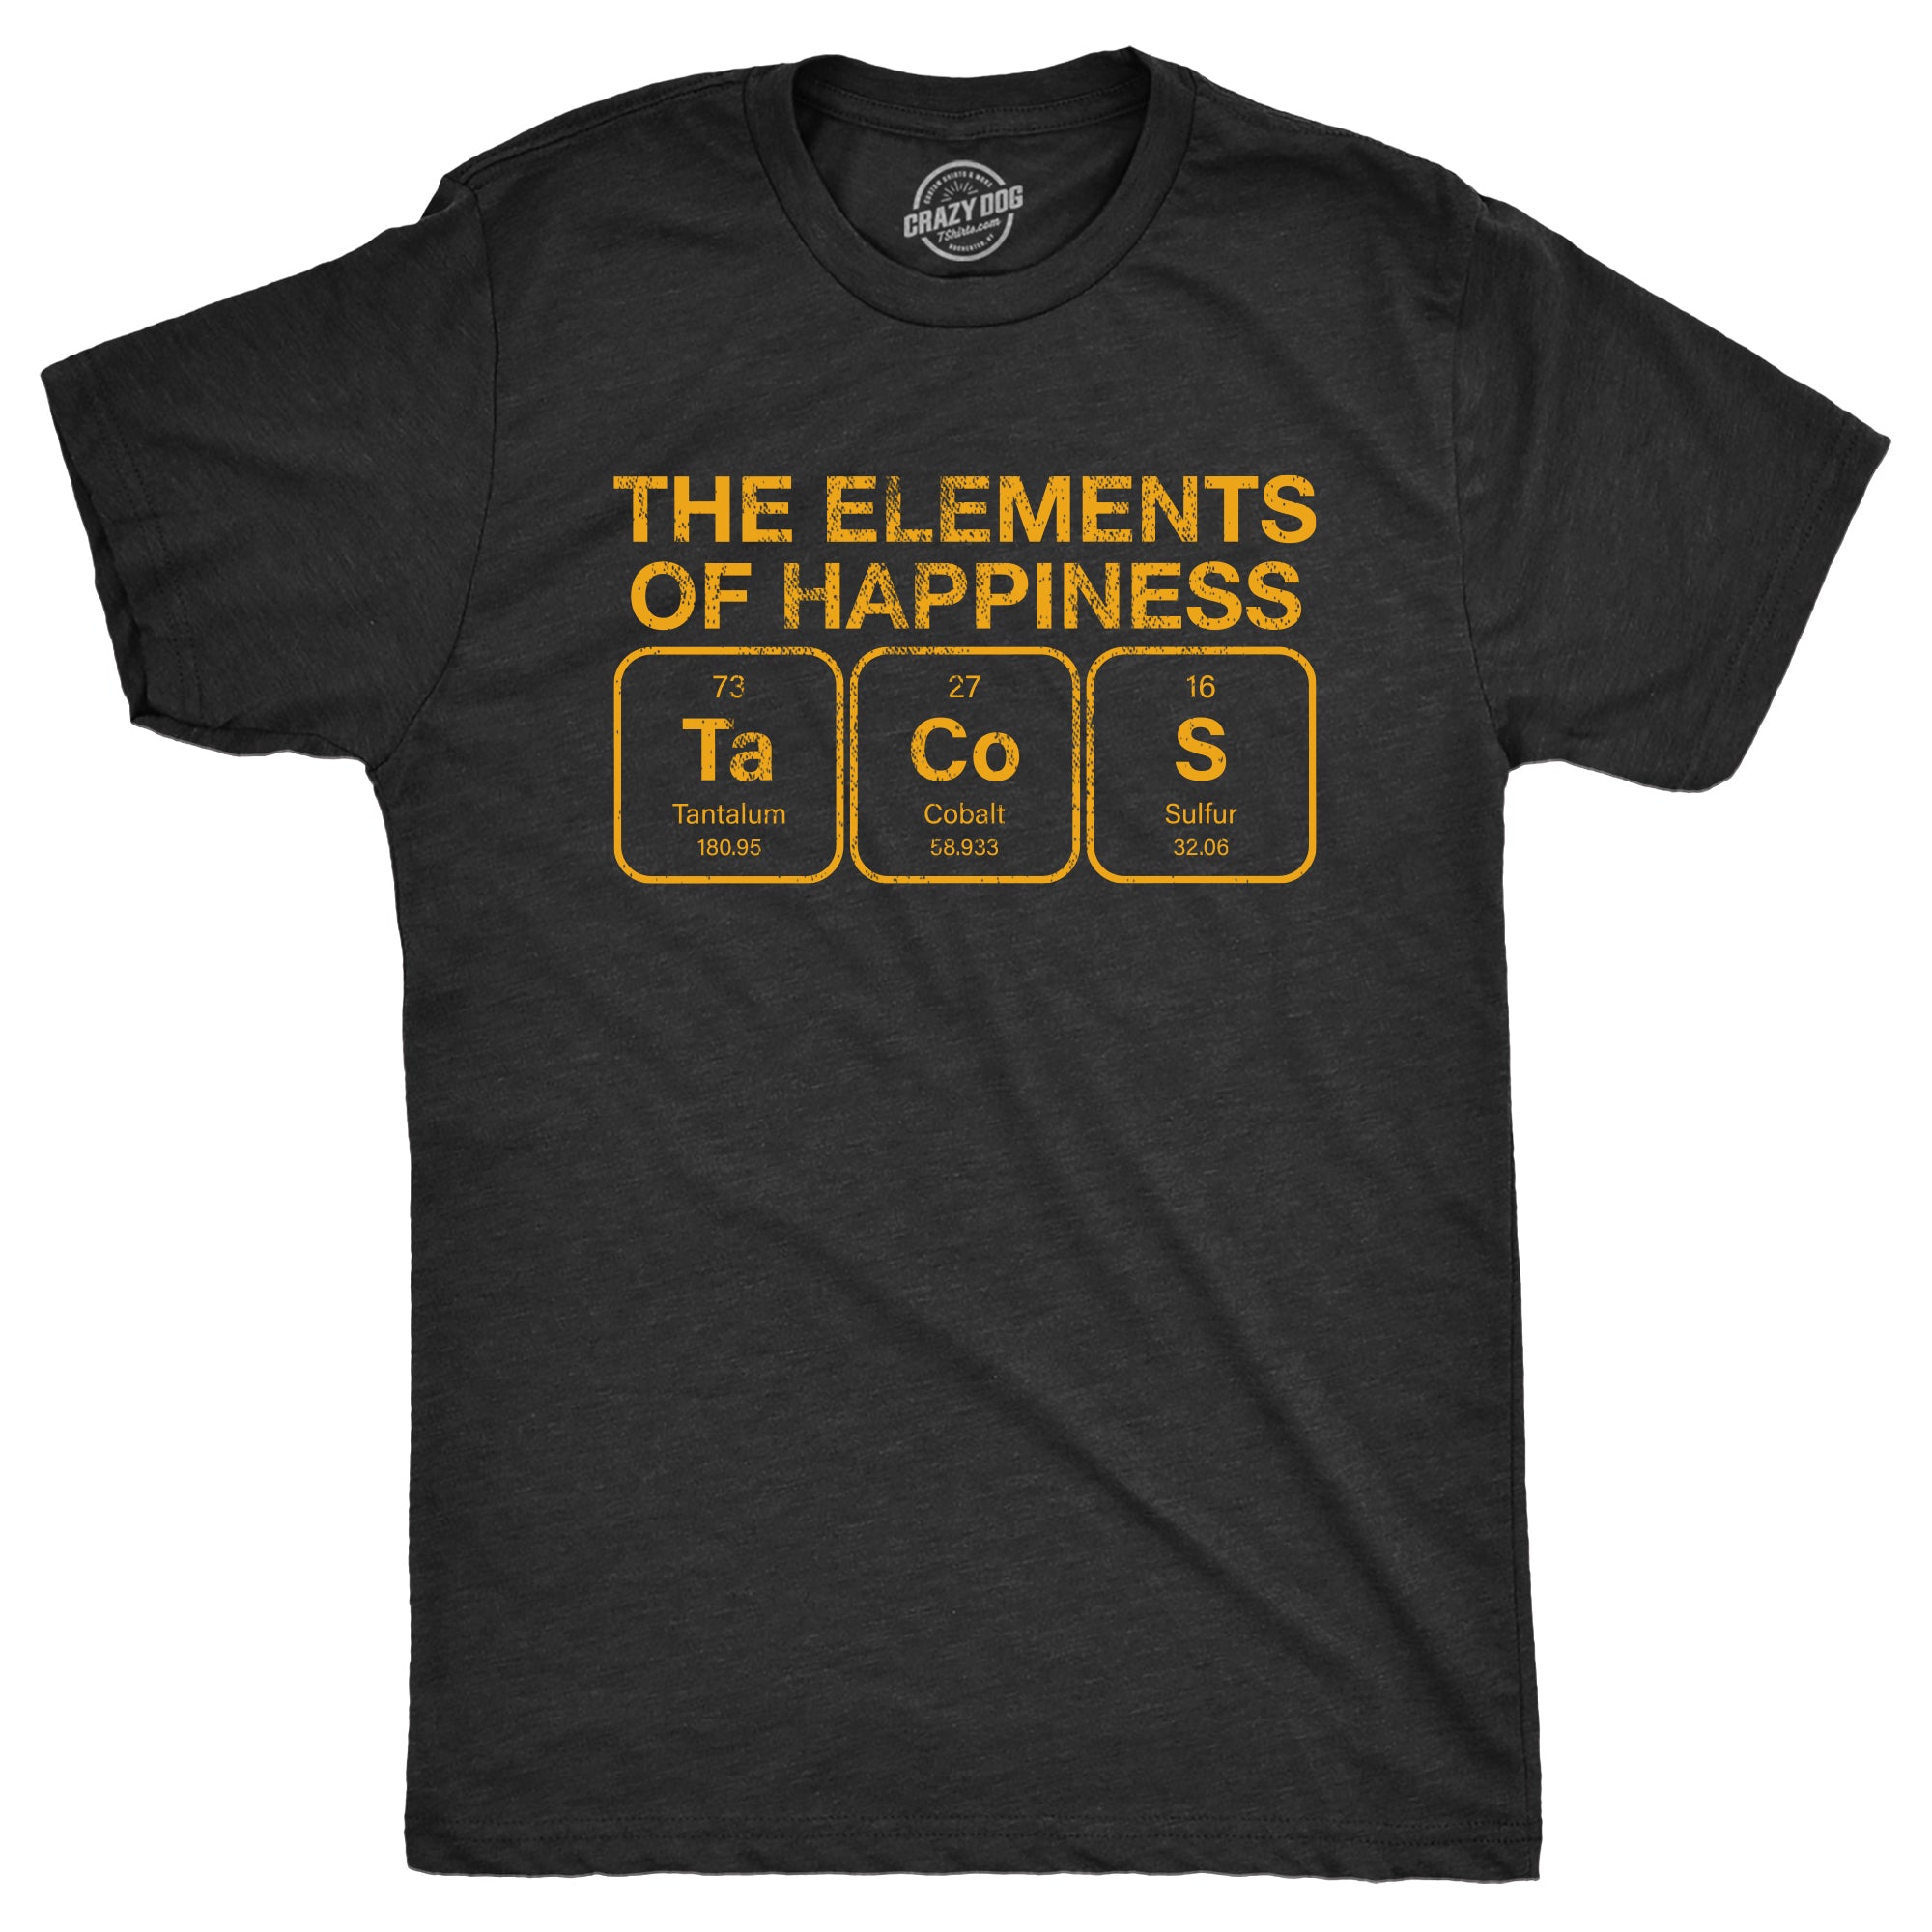 Funny Heather Black - TACOS The Elements Of Happiness Tacos Mens T Shirt Nerdy Science Food Tee